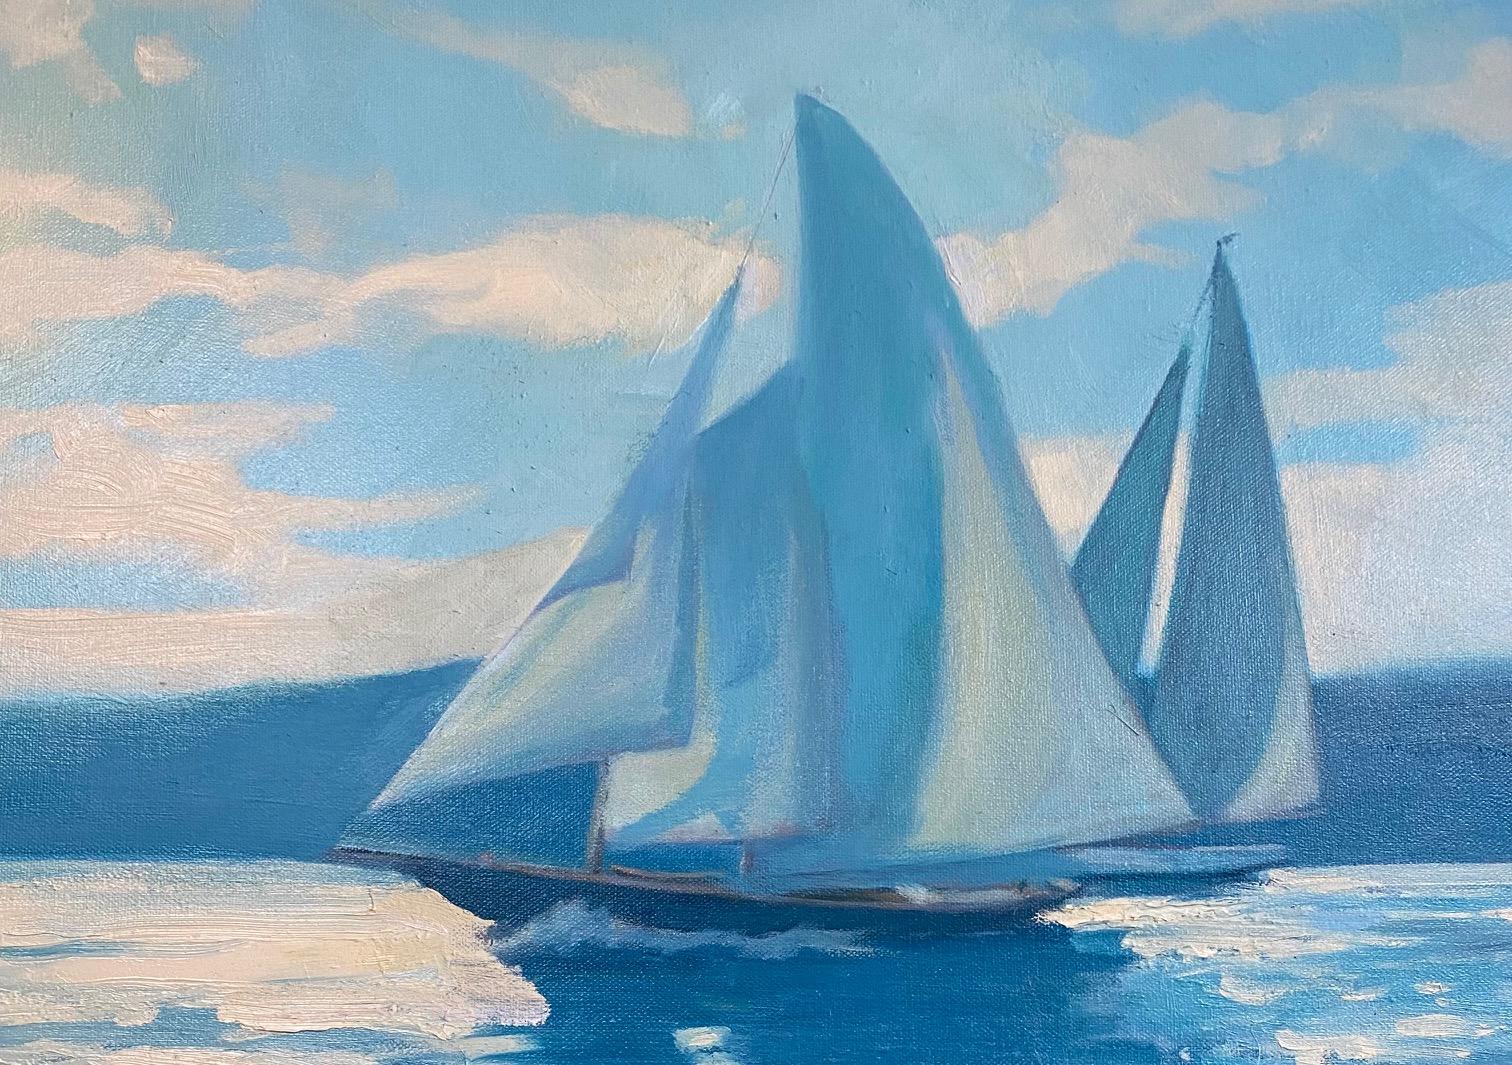 Sparkling waters in the afternoon on a pristine, sunlit day, warms the soul as a whispered lullaby.  Artist Leonard Mizerek employs classic impressionist brush strokes to add beauty, motion and dimension to the blue and white palette of this